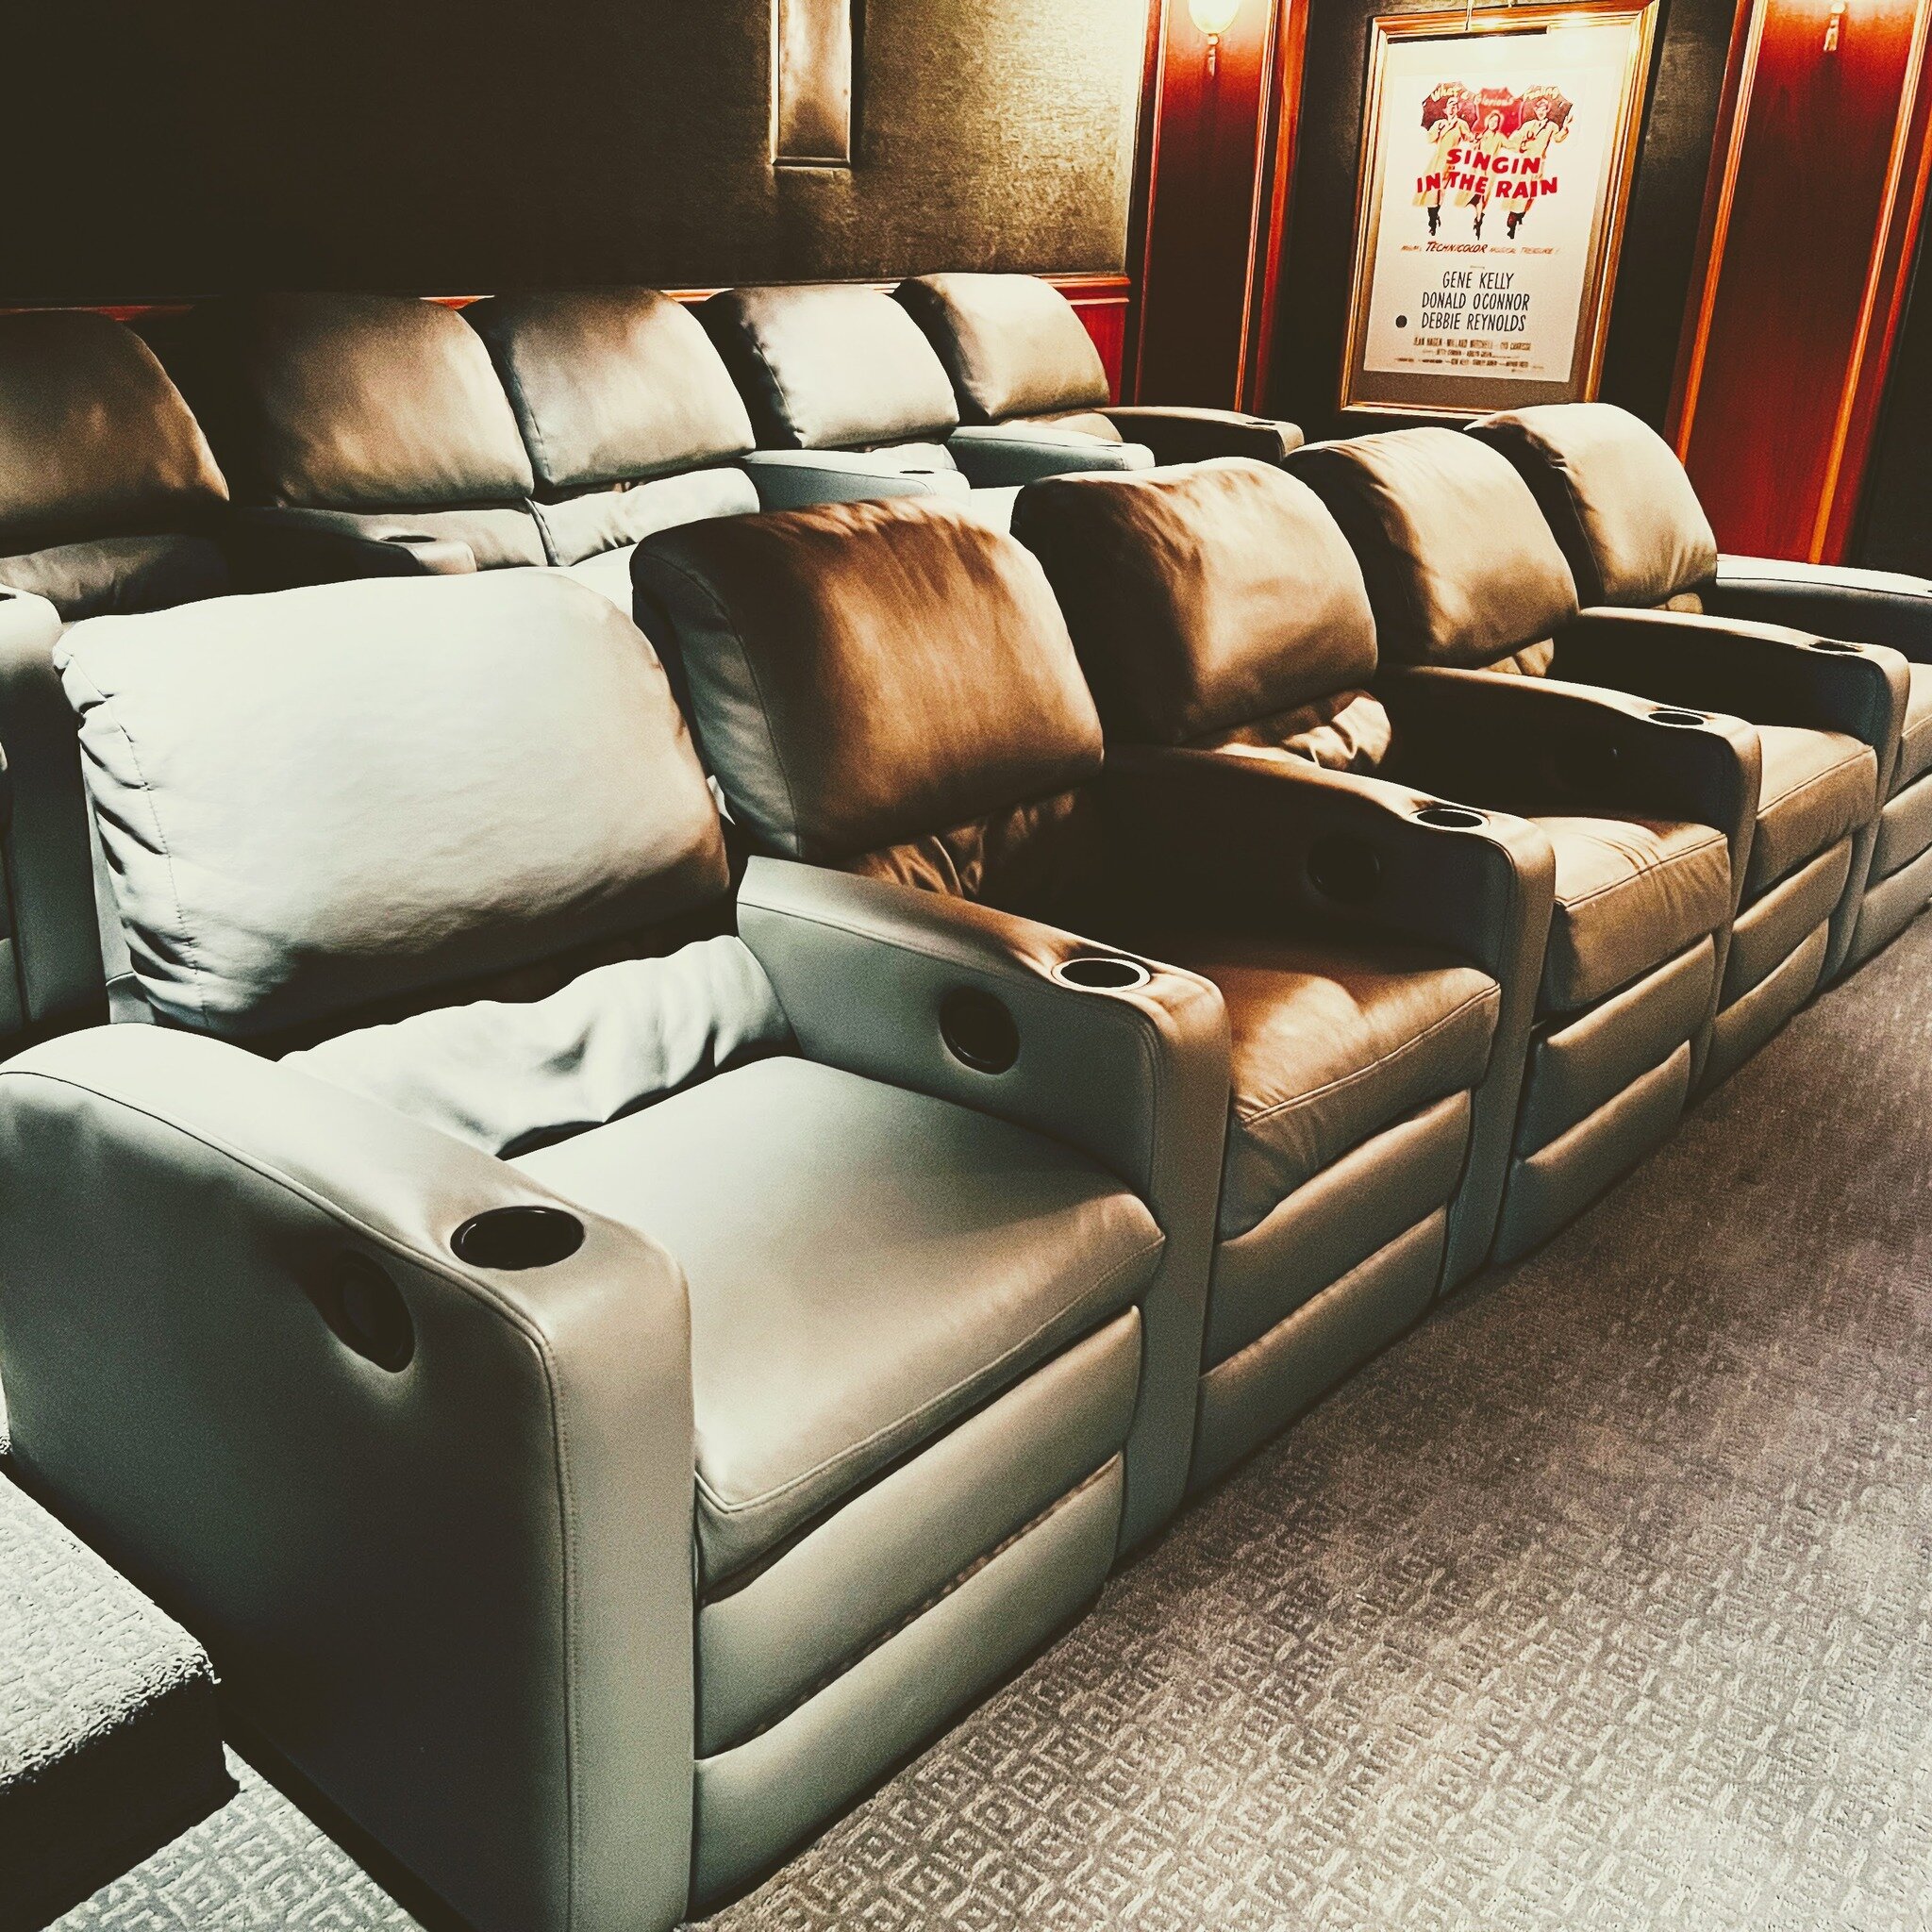 We are selling home theatre chairs, equipment and movie artwork at this weekend&rsquo;s #CoralGables #EstateSale. If you&rsquo;re upping your home entertainment game we have you covered! http://go.1or.ch 🎬📽